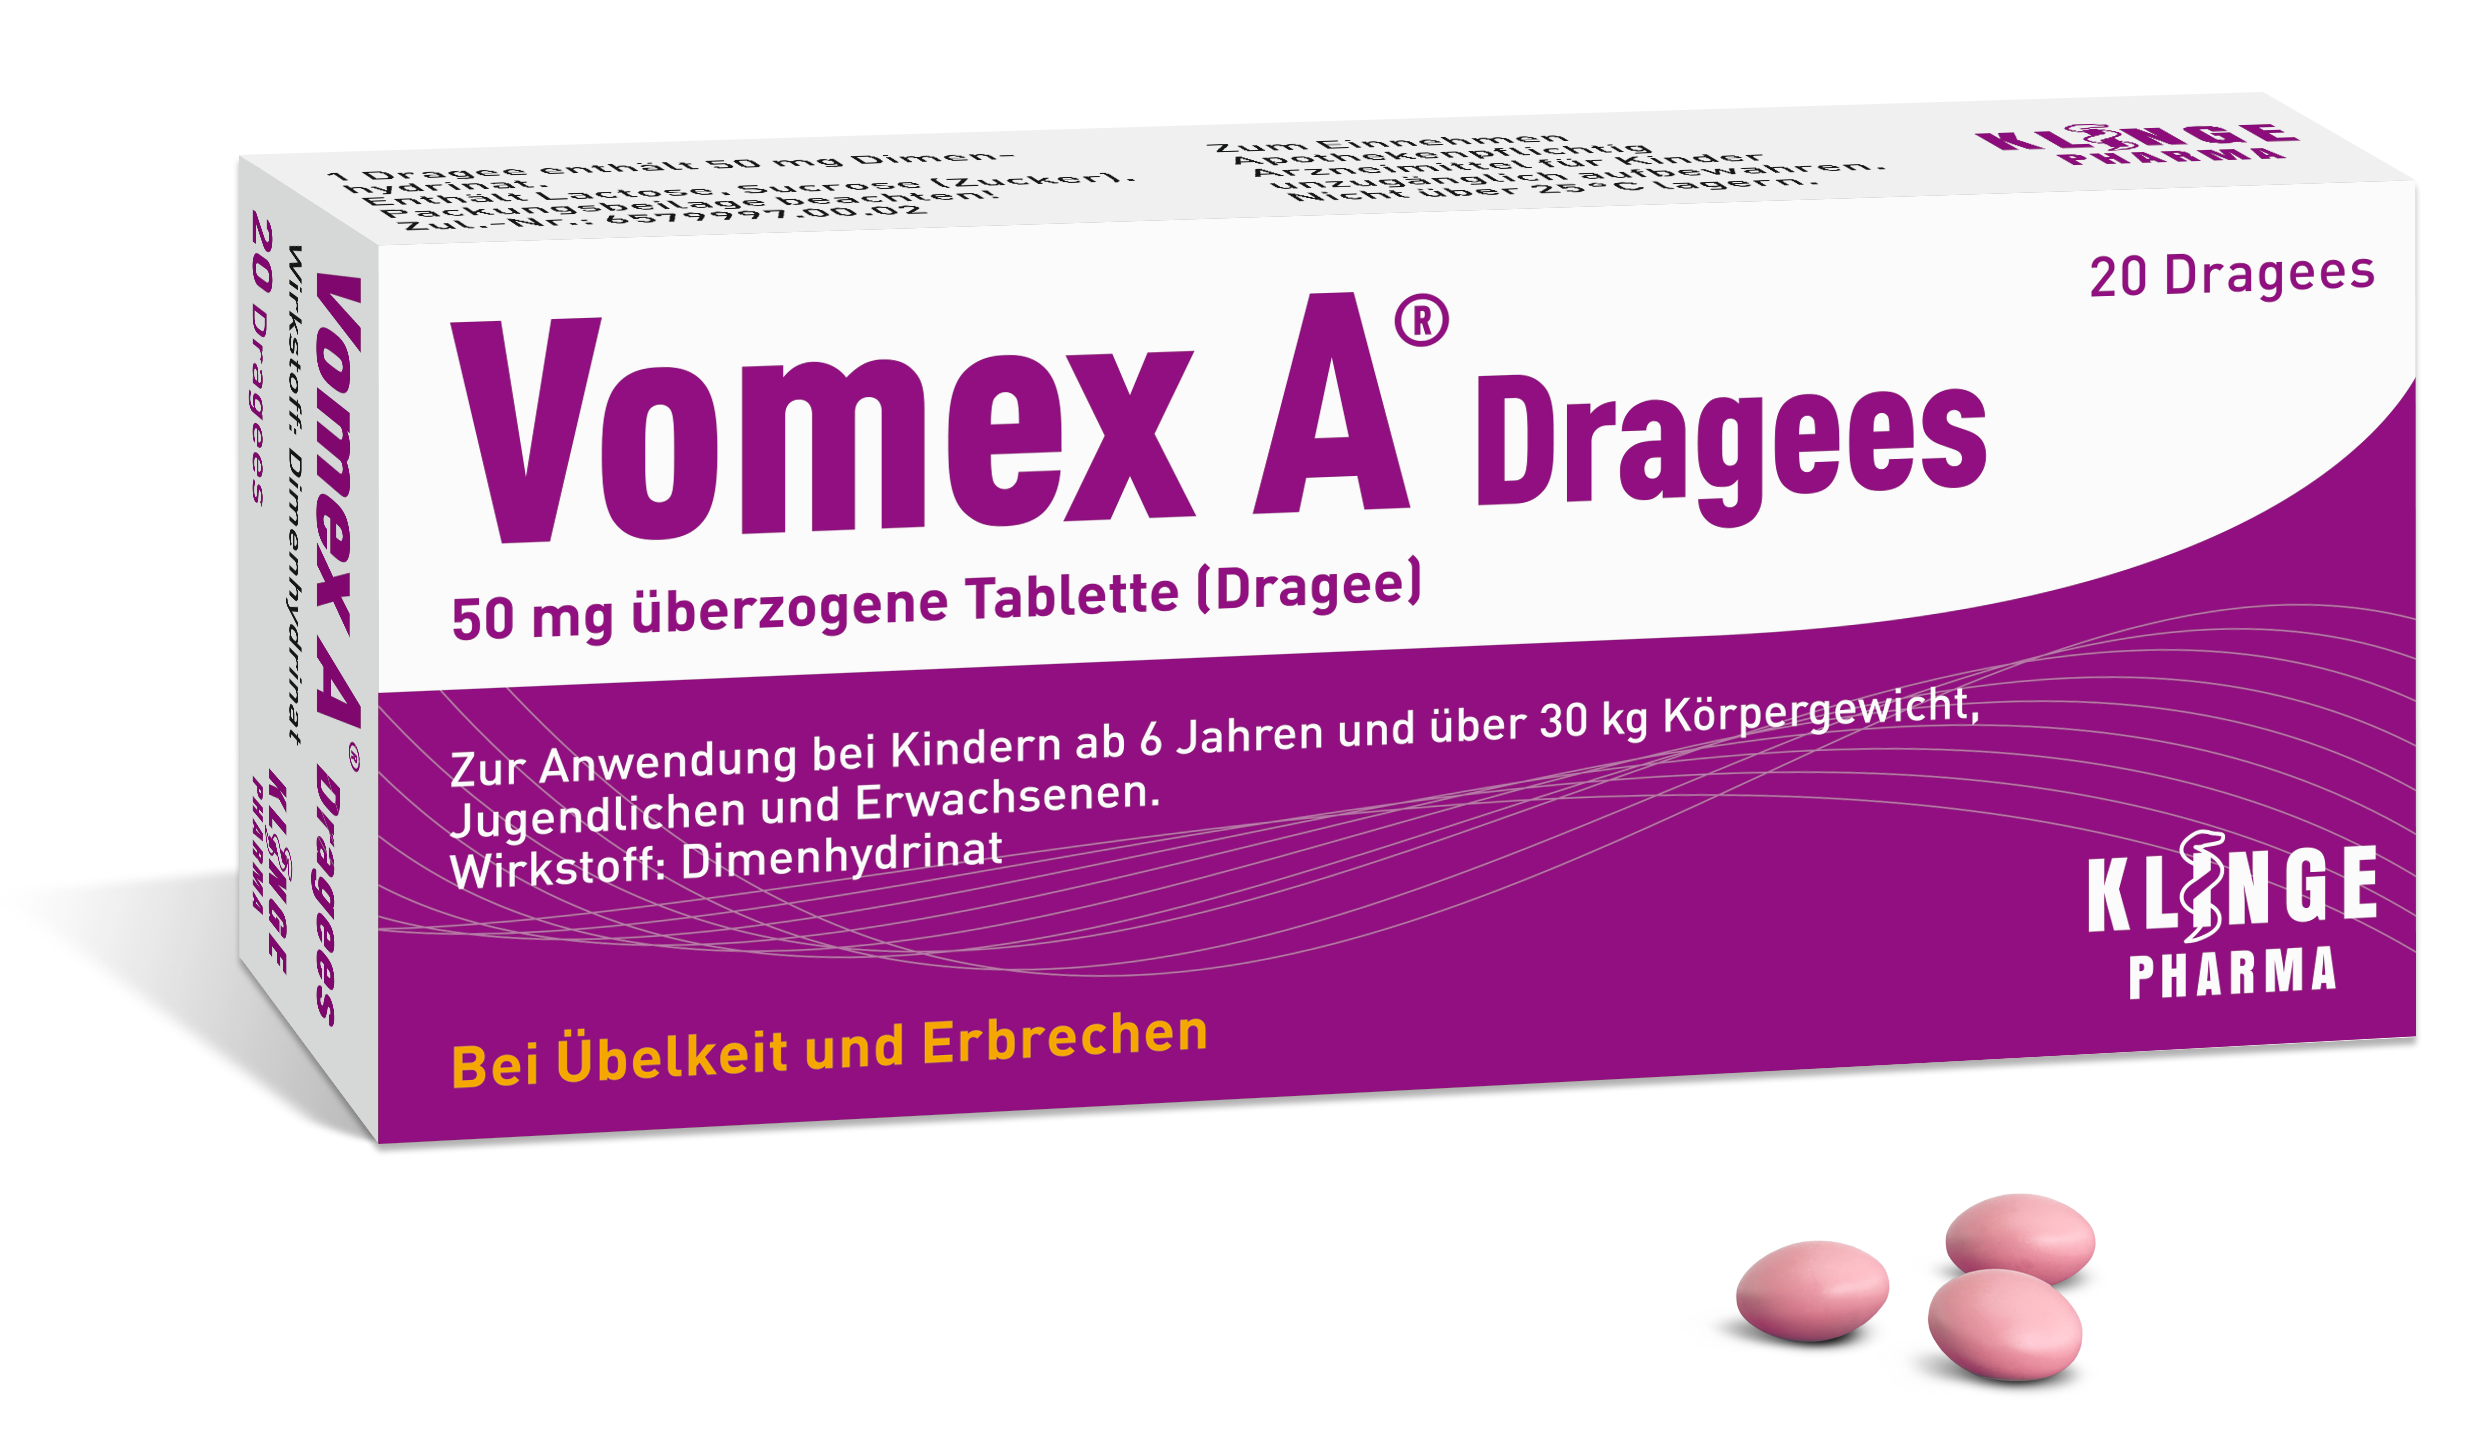 Vomex A Dragees (20 stk)